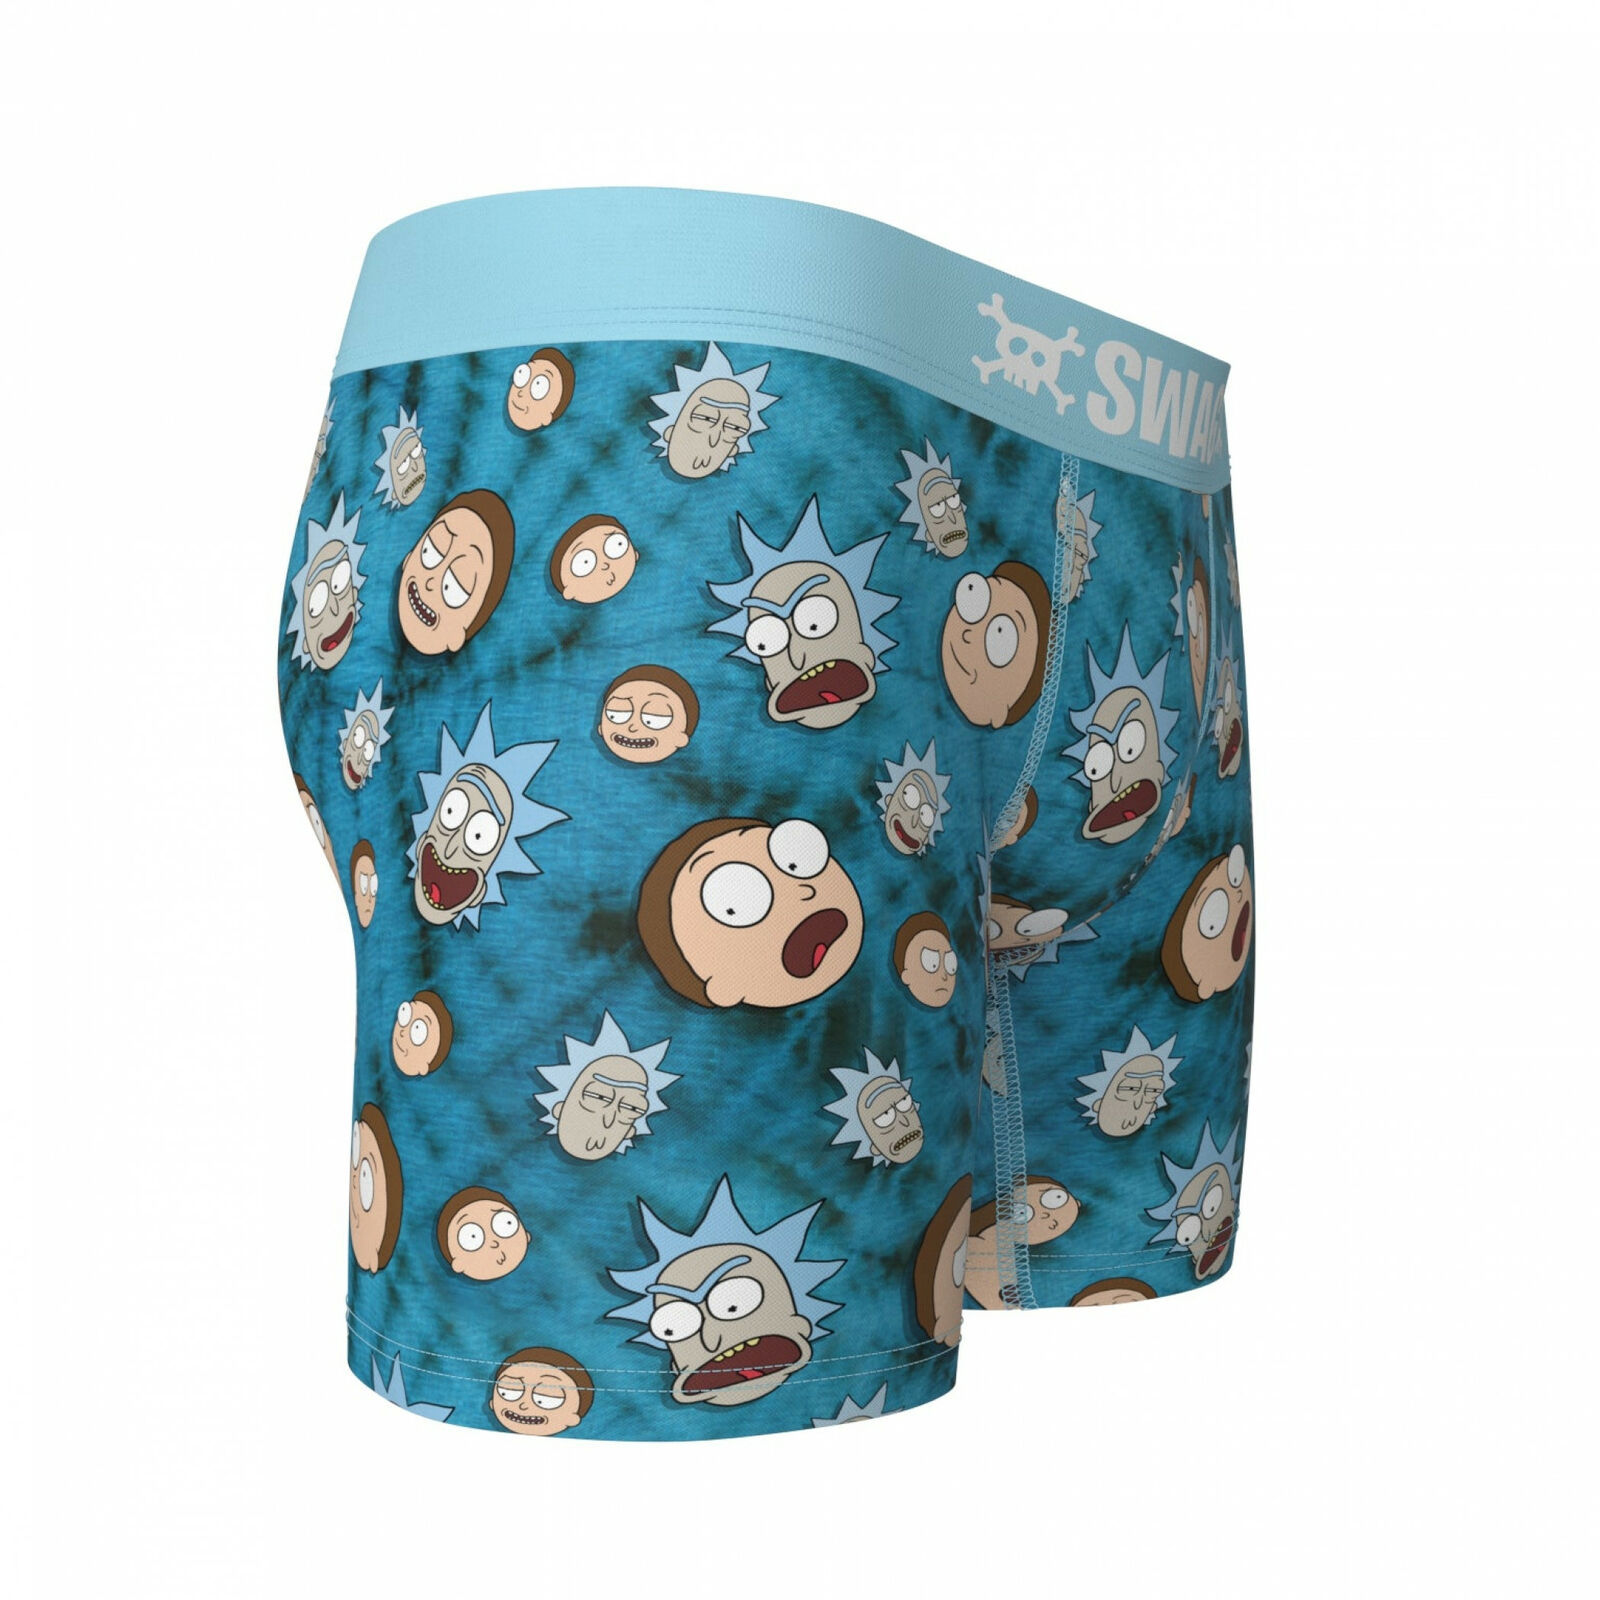 Crazy Boxers Toy Story Wild West Boxer Briefs